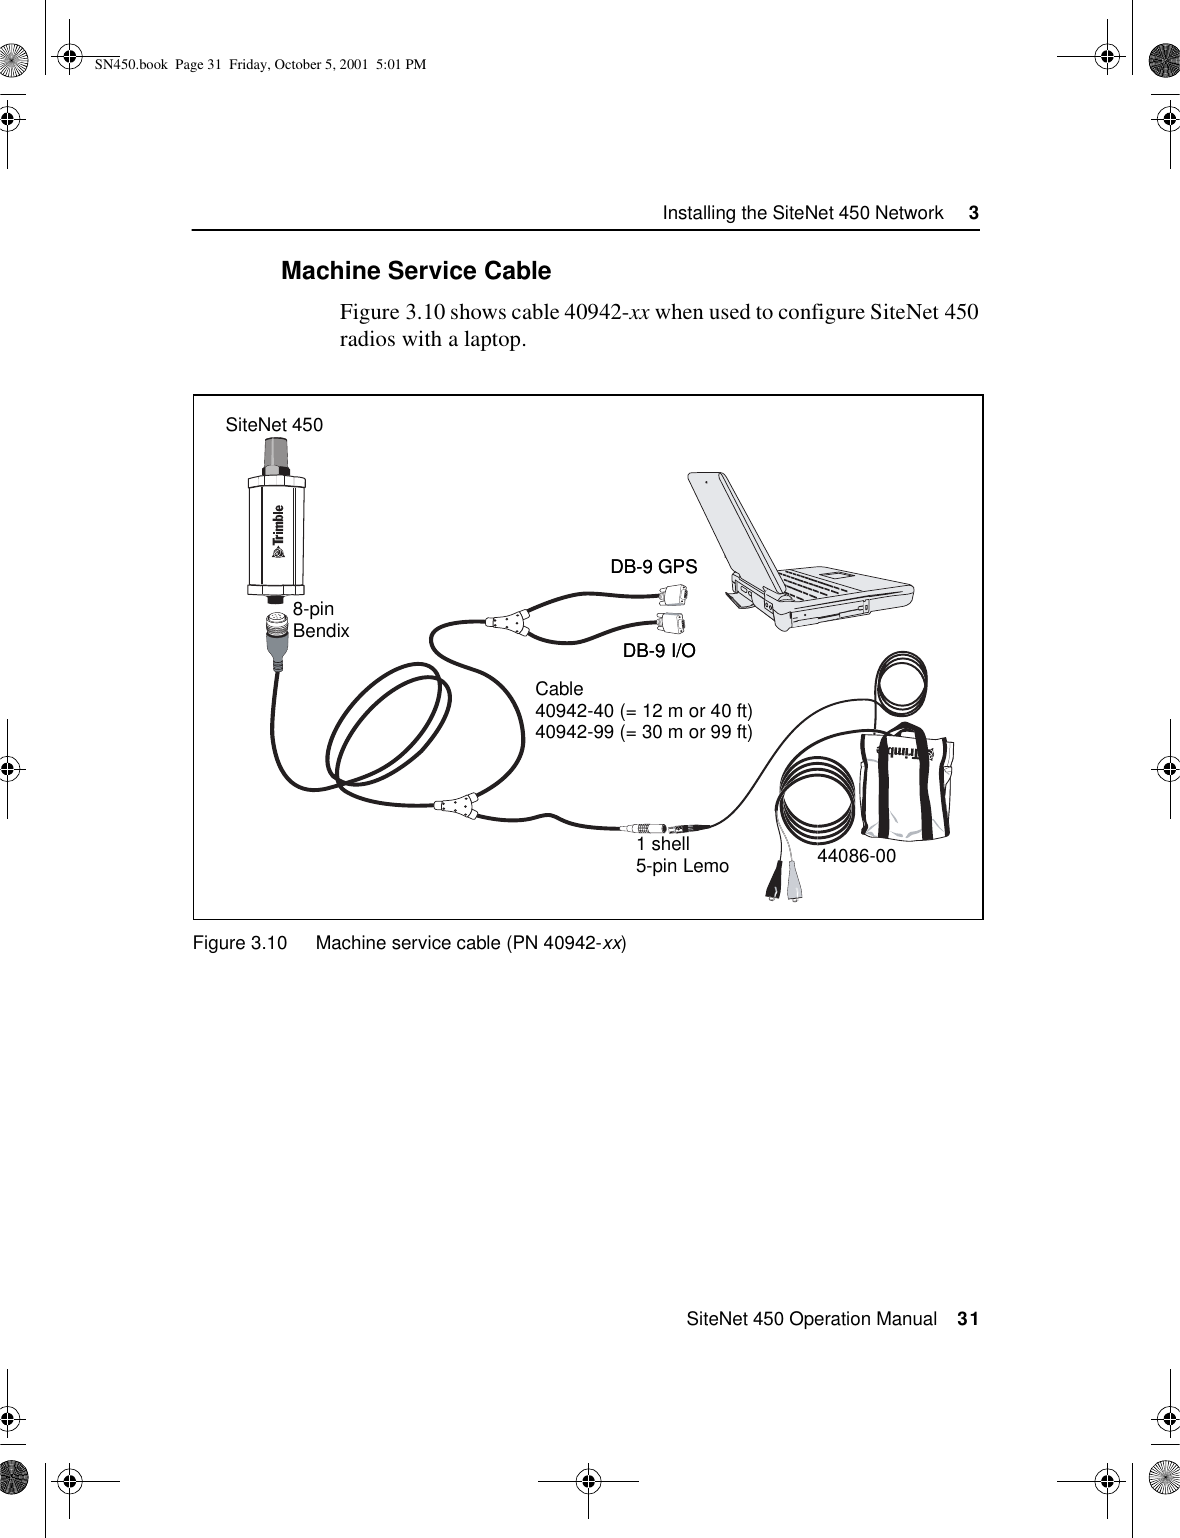  SiteNet 450 Operation Manual    31Installing the SiteNet 450 Network     33.4.3Machine Service CableFigure 3.10 shows cable 40942-xx when used to configure SiteNet 450 radios with a laptop.Figure 3.10  Machine service cable (PN 40942-xx)SiteNet 450Cable40942-40 (= 12 m or 40 ft)40942-99 (= 30 m or 99 ft)44086-008-pinBendixDB-9 GPSDB-9 I/O1 shell5-pin LemoDB-9 GPSDB-9 I/OSN450.book  Page 31  Friday, October 5, 2001  5:01 PM